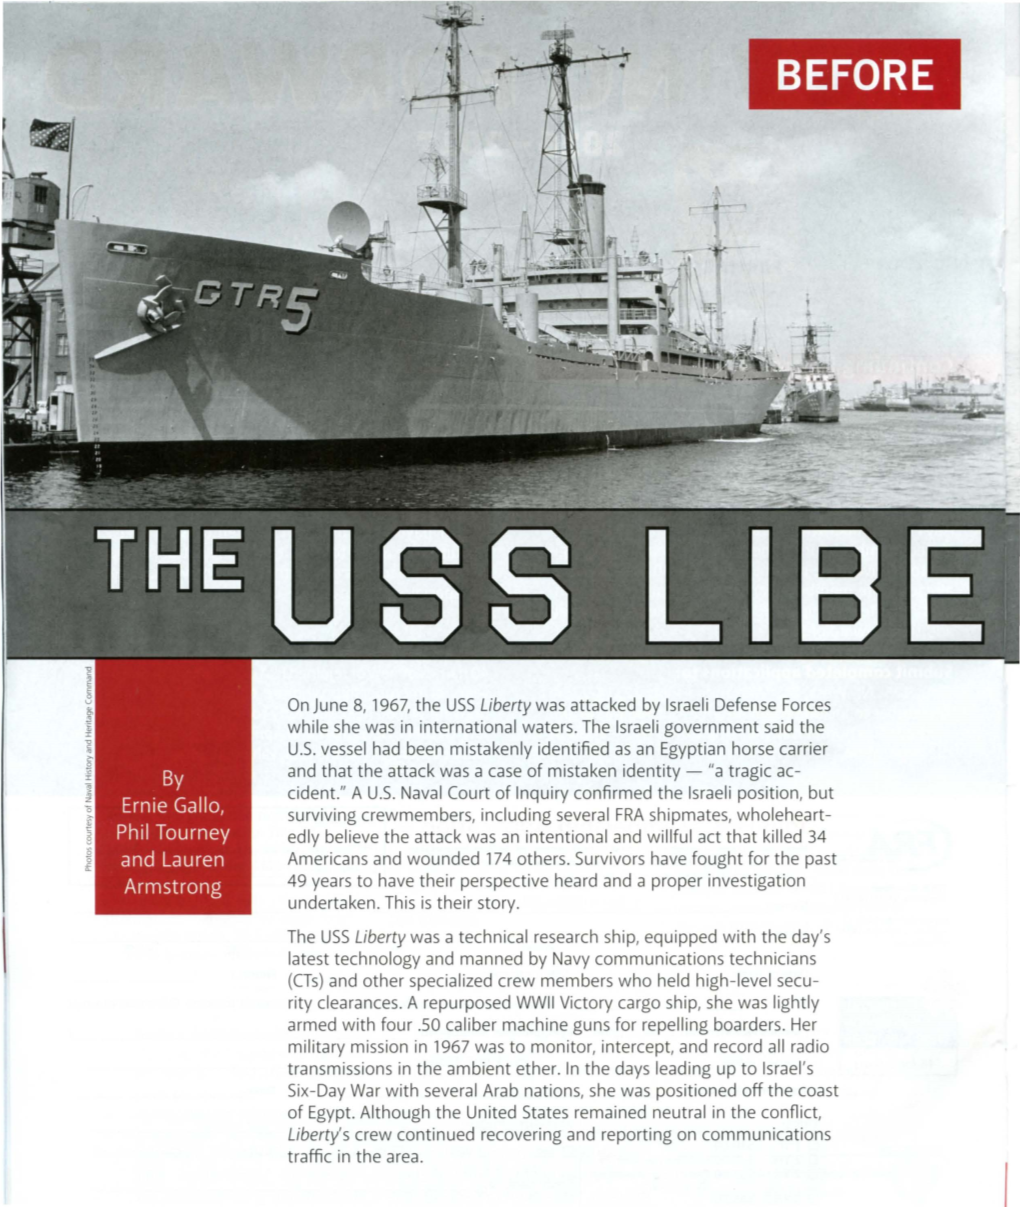 On June 8, 1967, the USS Liberty Was Attacked by Israeli Defense Forces While She Was in International Waters